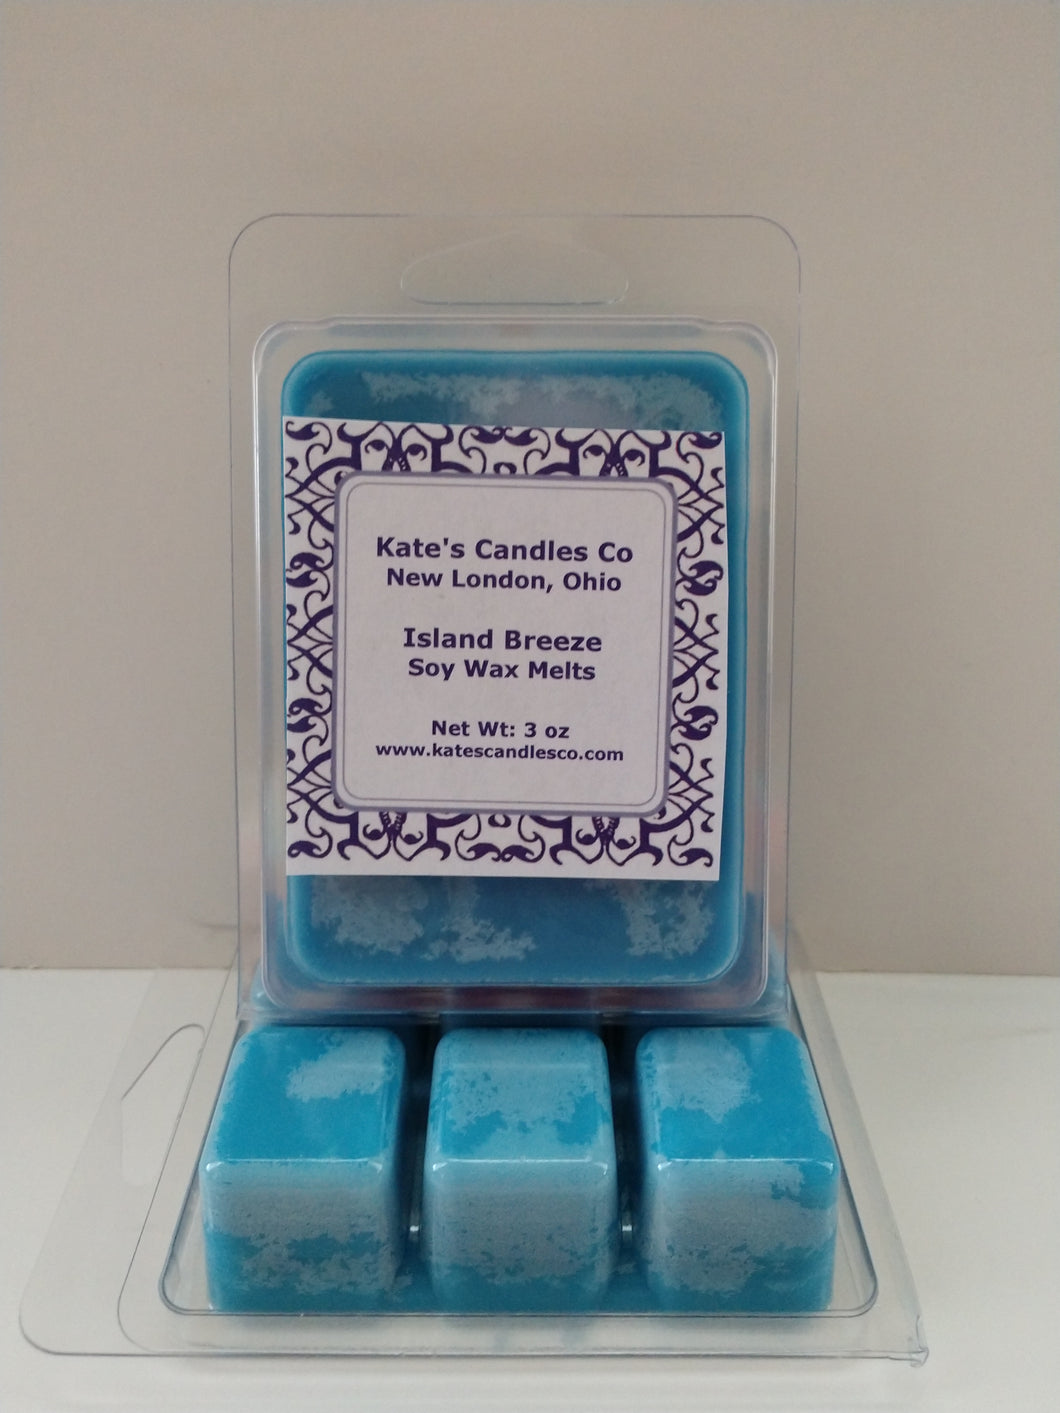 Island Breeze Soy Wax Melts For Electric or Tealight Wax Warmers - Kate's Candles Co. Soy Candles